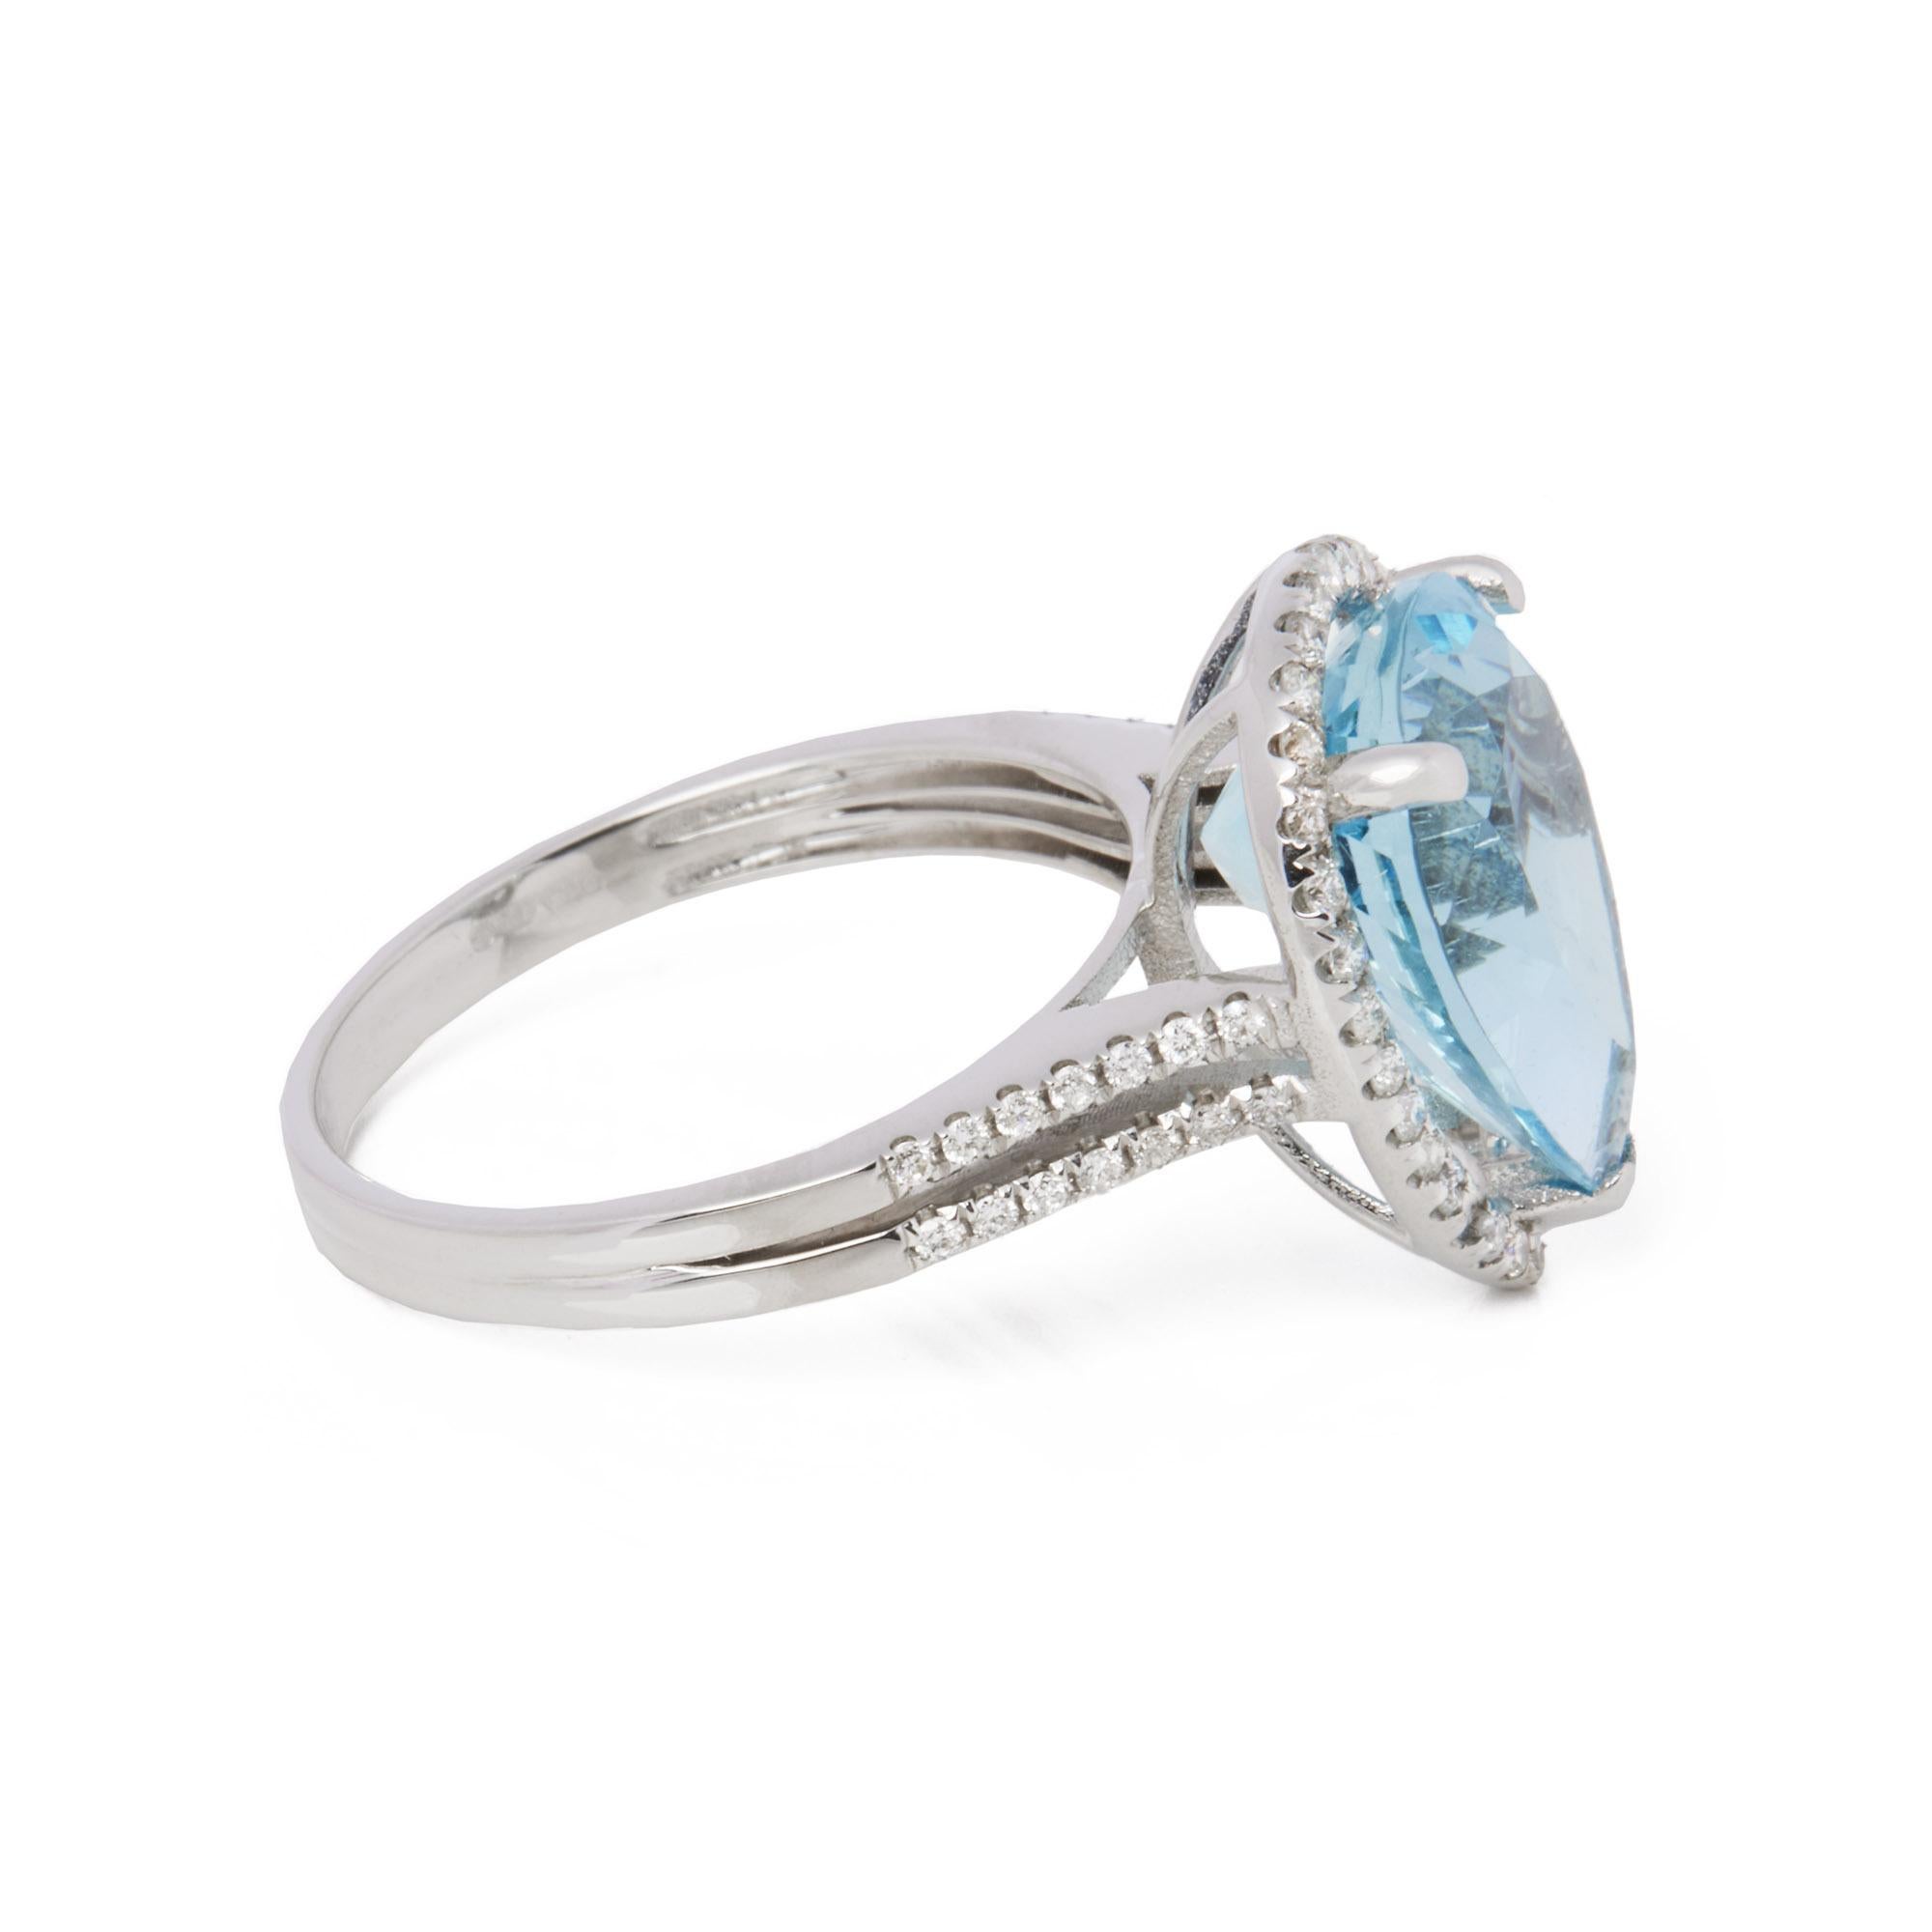 Contemporary David Jerome Certified 4.77ct Pear Cut Aquamarine and Diamond Ring For Sale